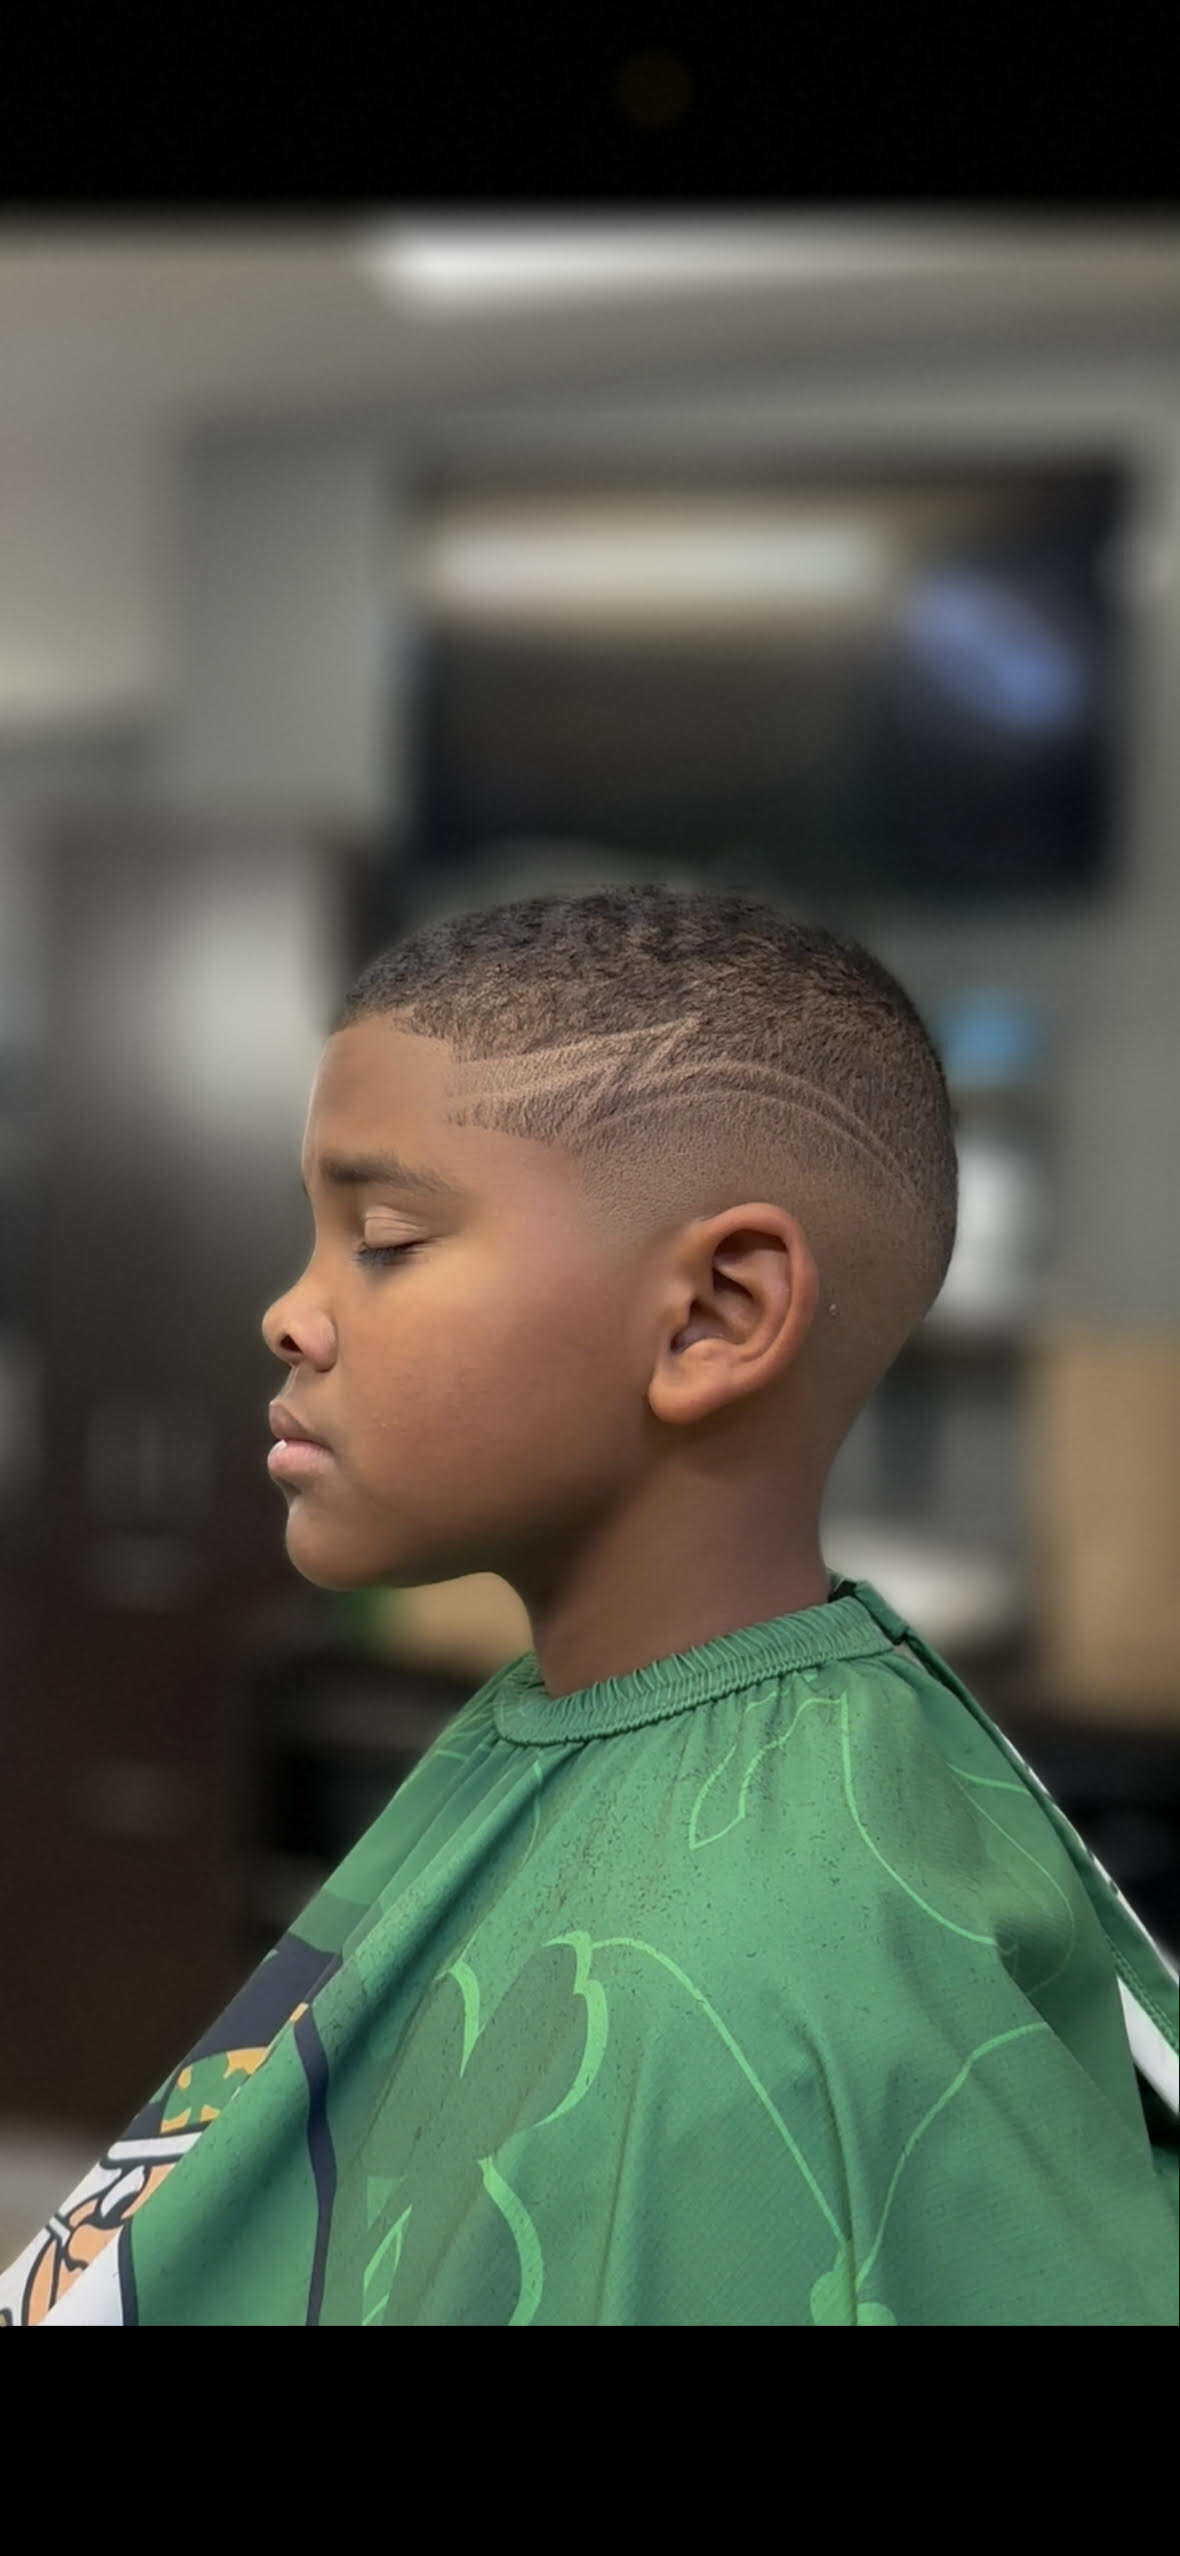 Customized Kids Cut and Fade Design - Venice Florida Whos Your Barber